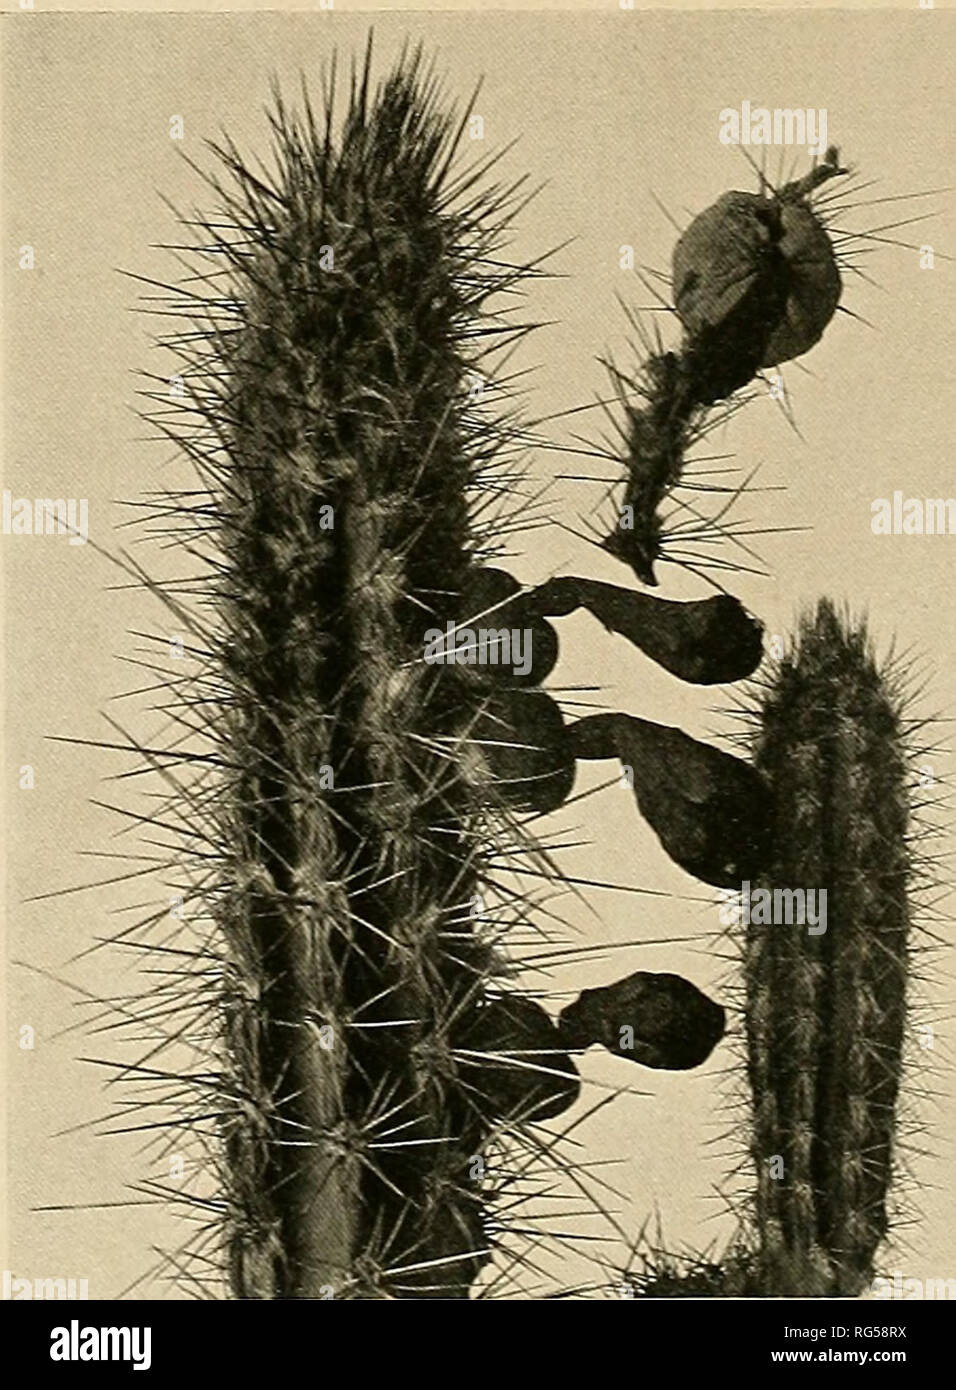 . The Cactaceae : descriptions and illustrations of plants of the cactus family. 270 THE CACTACEAE. Figxire 242 is from a photograph taken by IMr. Collins in 1902; it is three-fourths natural size. On page 58, vol. 11. under Cephalocereus Jiermentiamis, add: Illustration: ]Iollers Deutsche Gart. Zeit. 25: 473. f. 5, No. 10, as Pilocereus hermentianus. On page 58, vol. 11, under Pilocereiis albisetosus, add the sjTionyms: Cactus alhisetosus Sprengel, Syst. 2: 496. 1825; Cactus albisetus Steudel, Xom. ed. 2. i: 245. 1840. On page 61, vol. 11, under Espostoa lanata, add to illustrations: Schelle Stock Photo